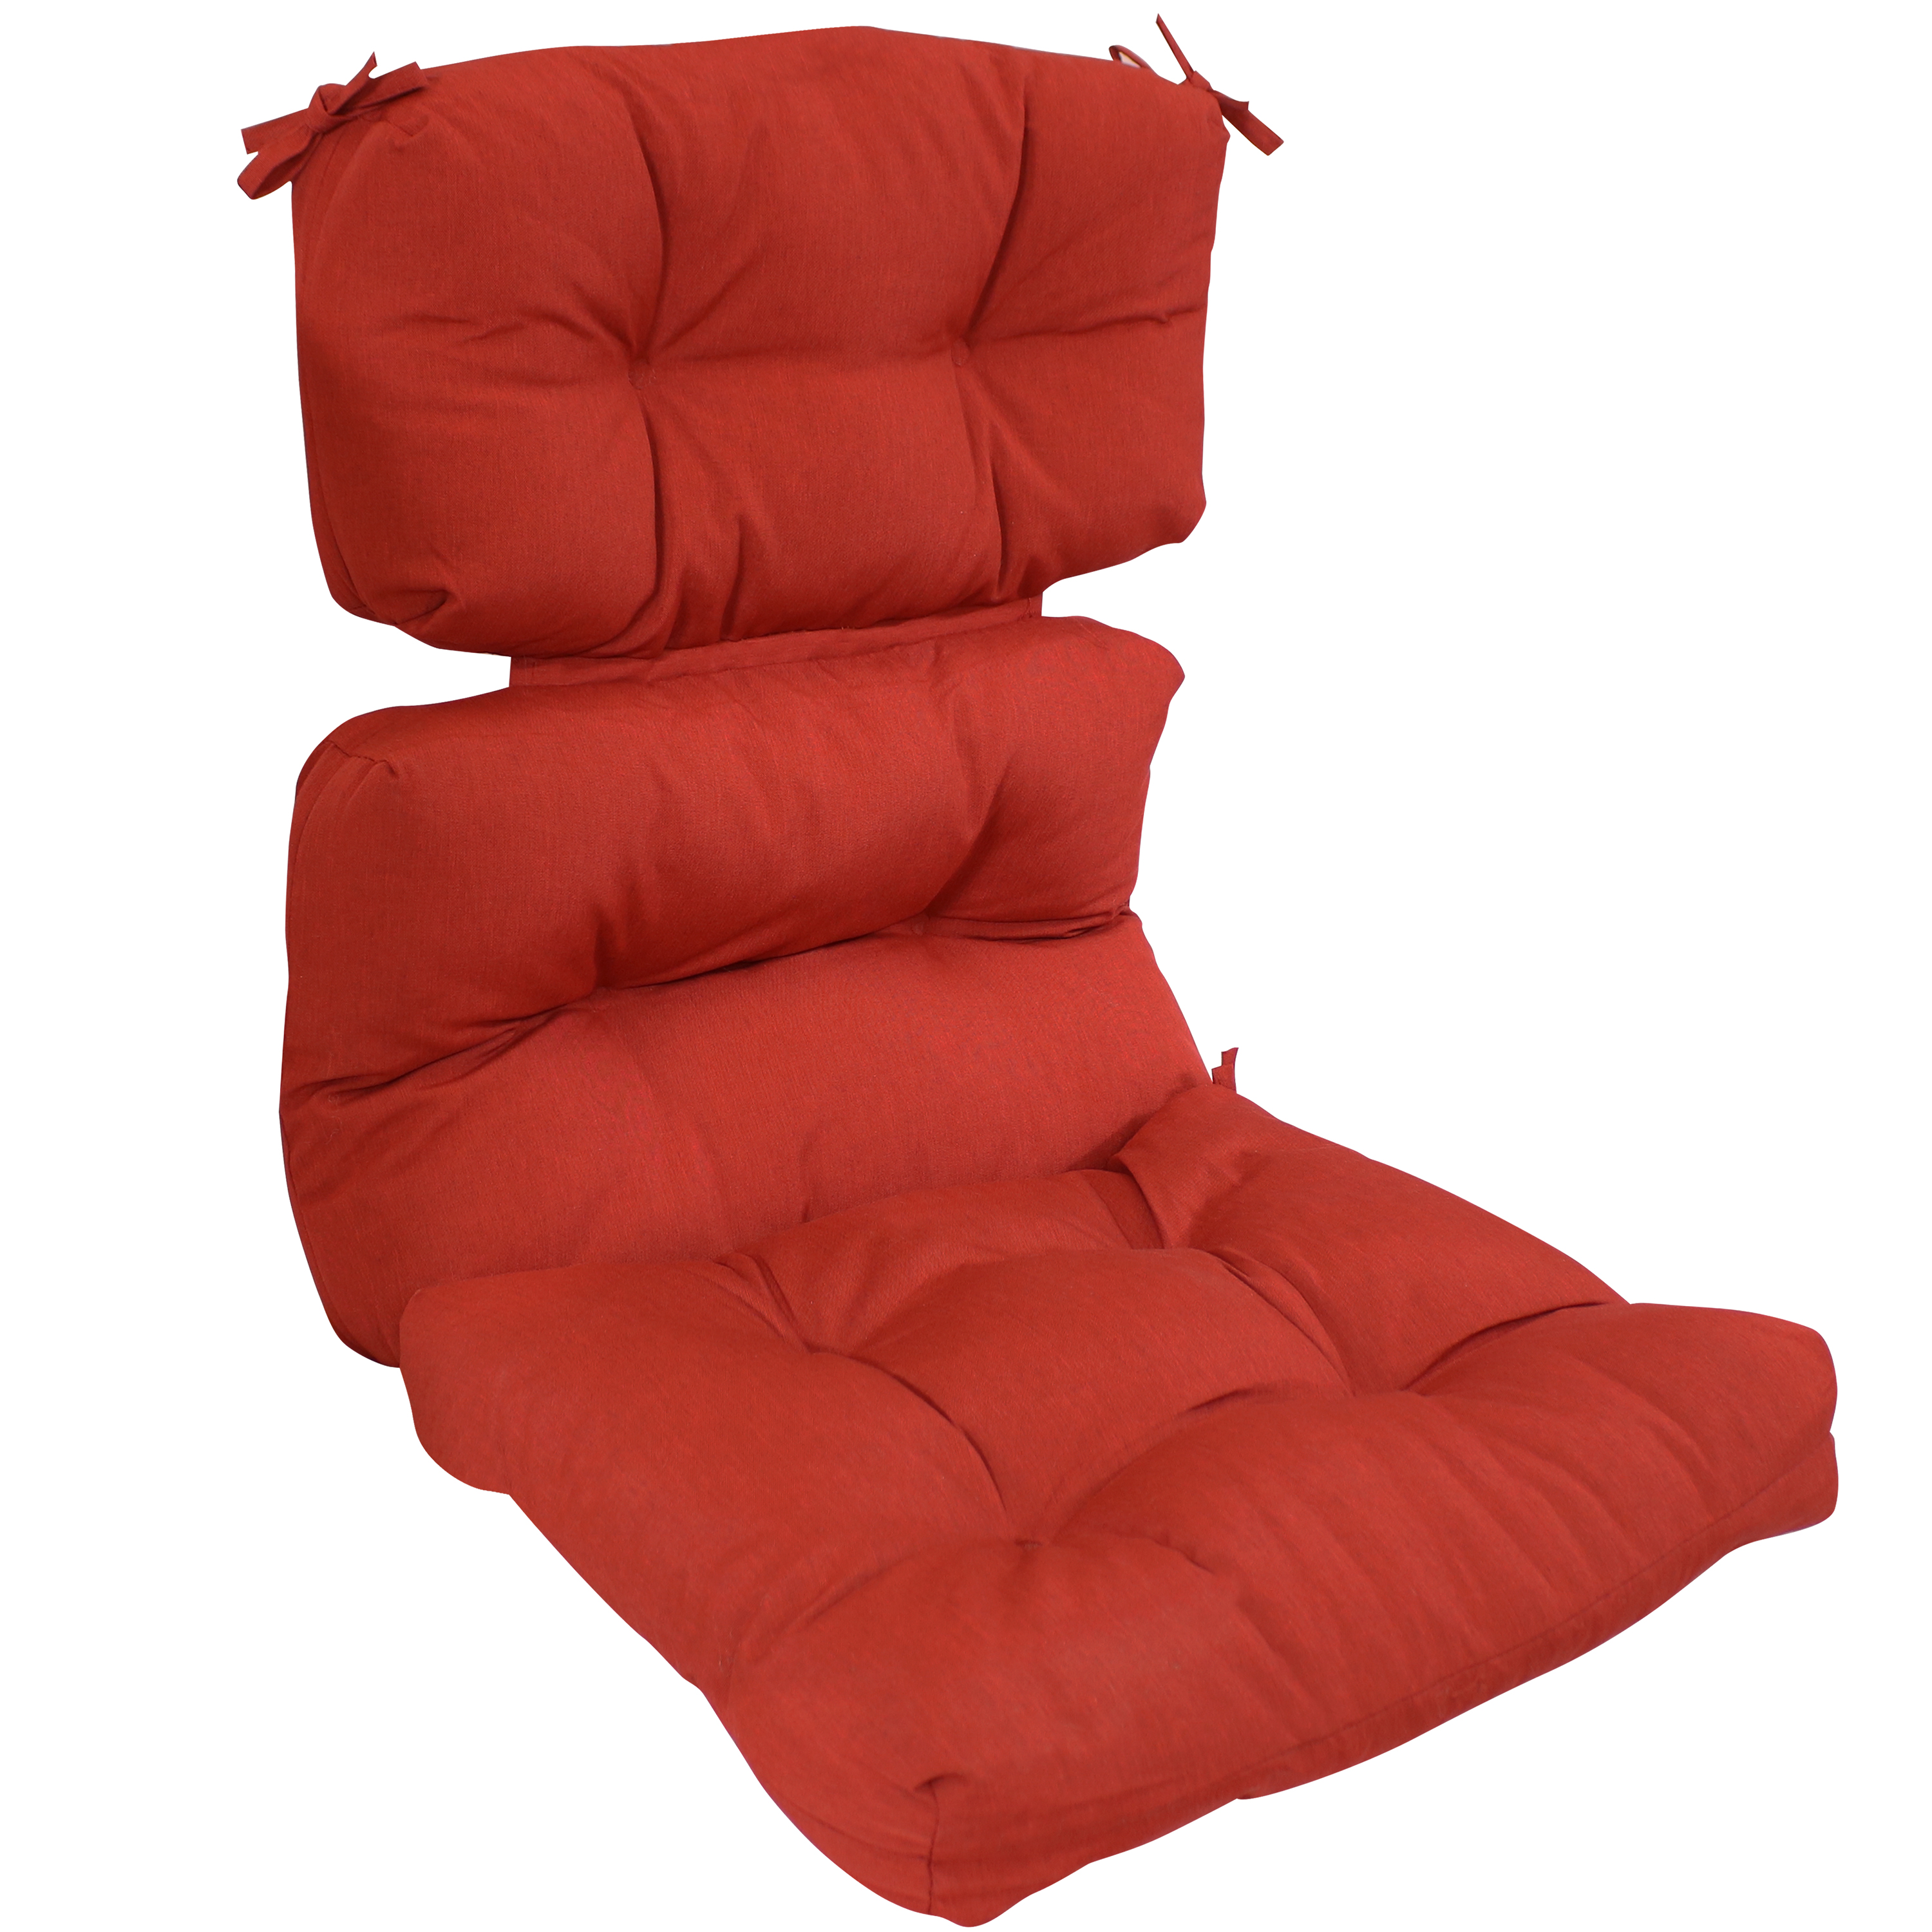 Indoor/Outdoor Olefin Tufted High-Back Chair Cushion - Red